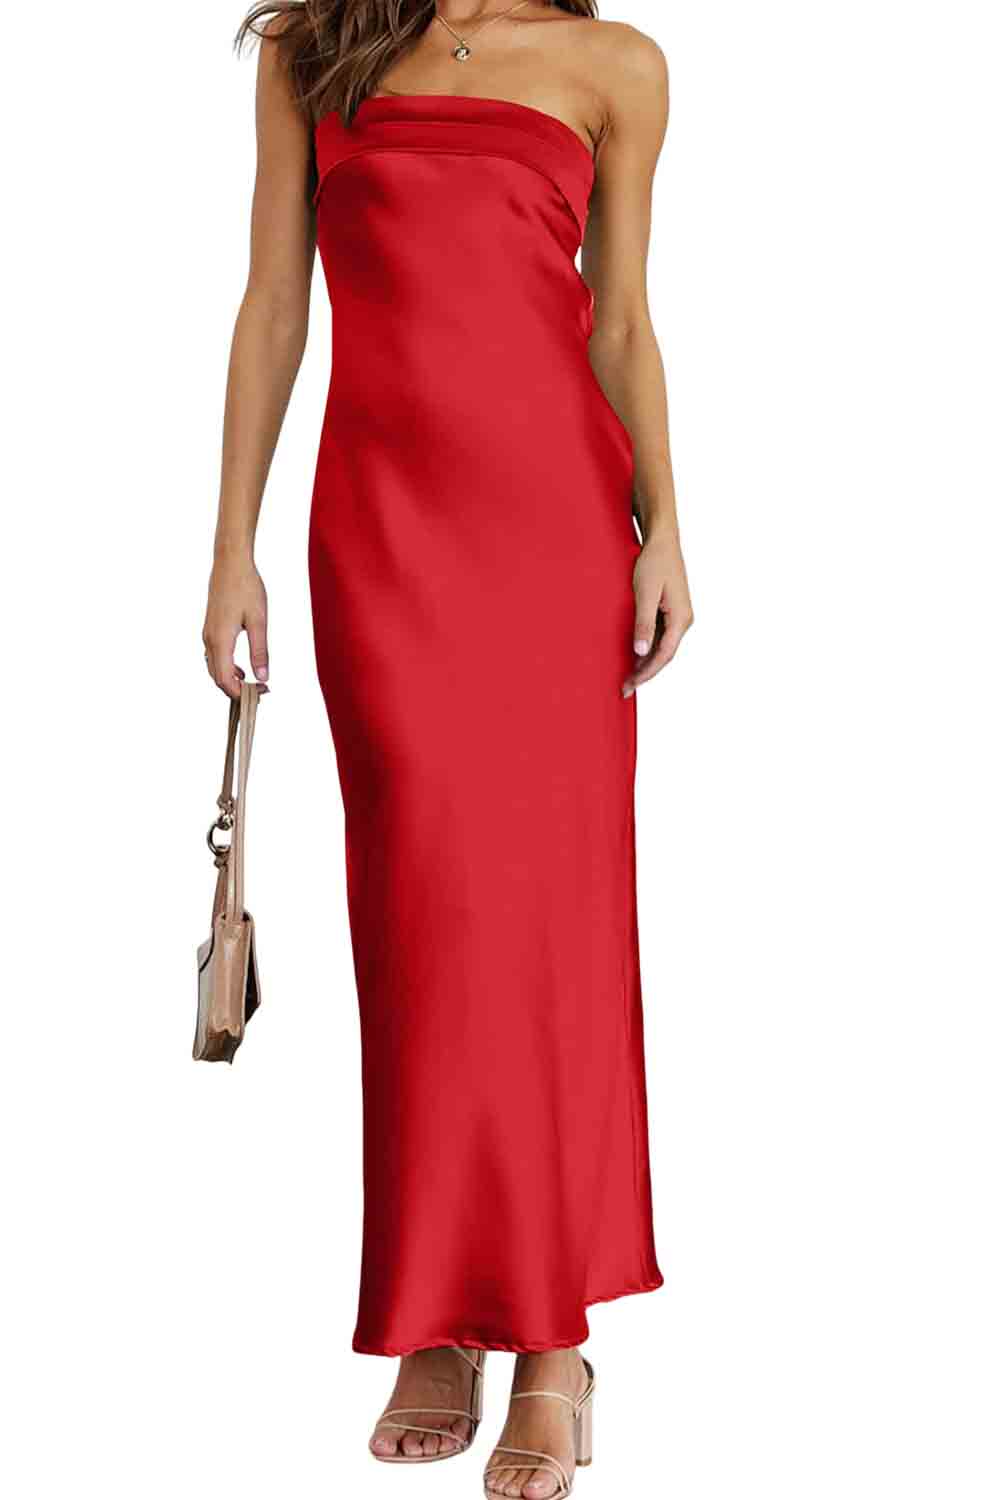 Red Strapless Pleated Neckline Cut out Back Maxi Dress Dresses JT's Designer Fashion